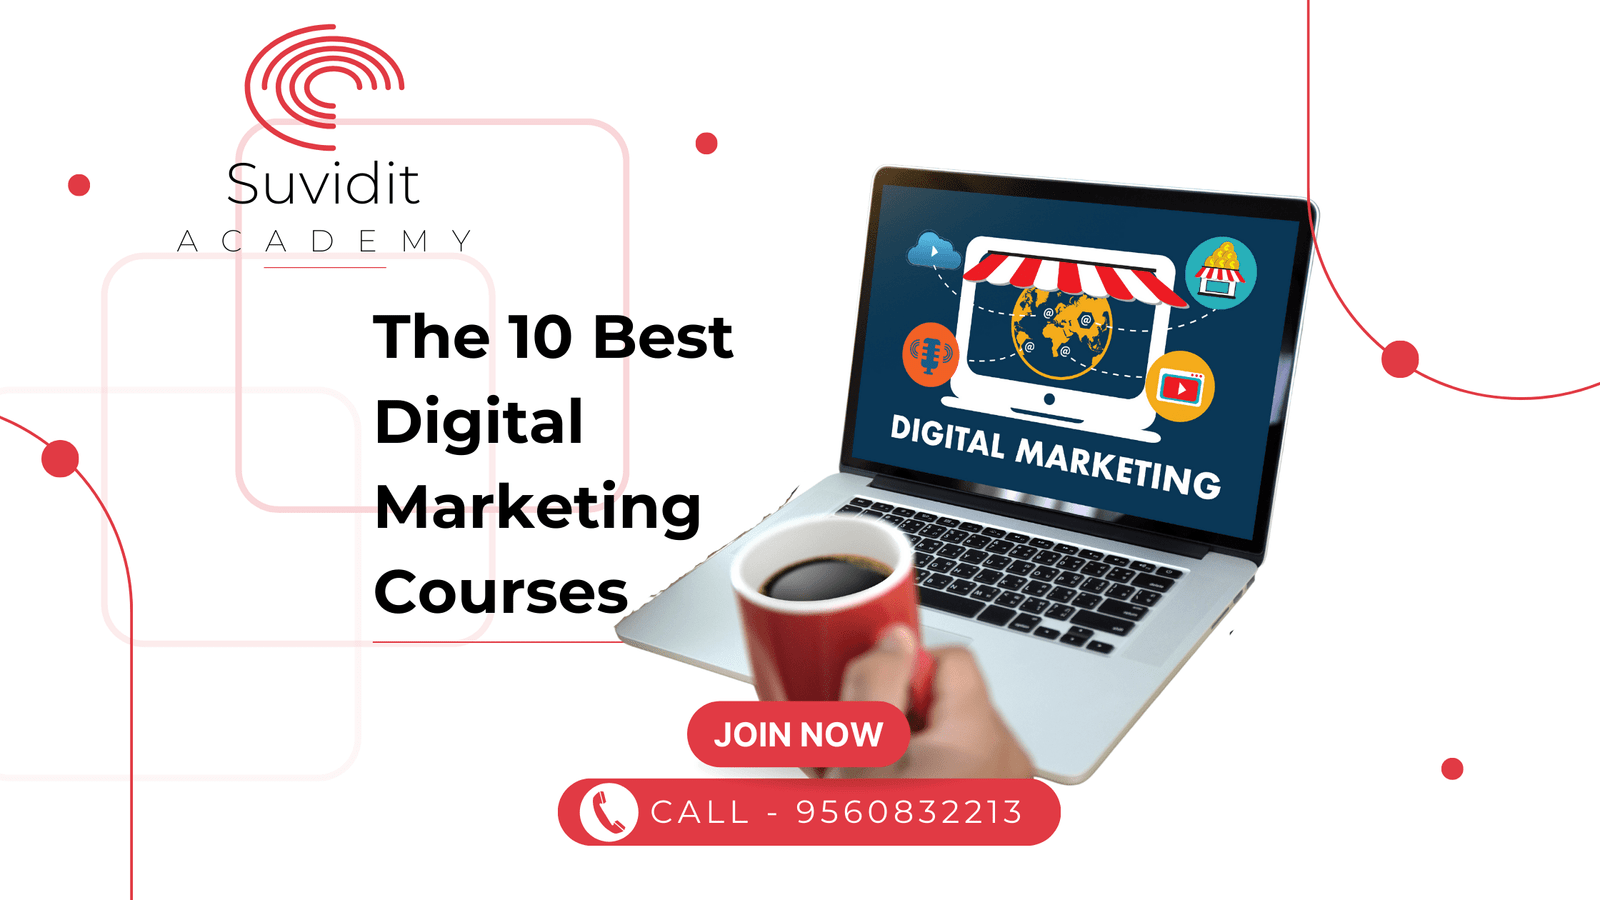 The 10 Best Digital Marketing Courses